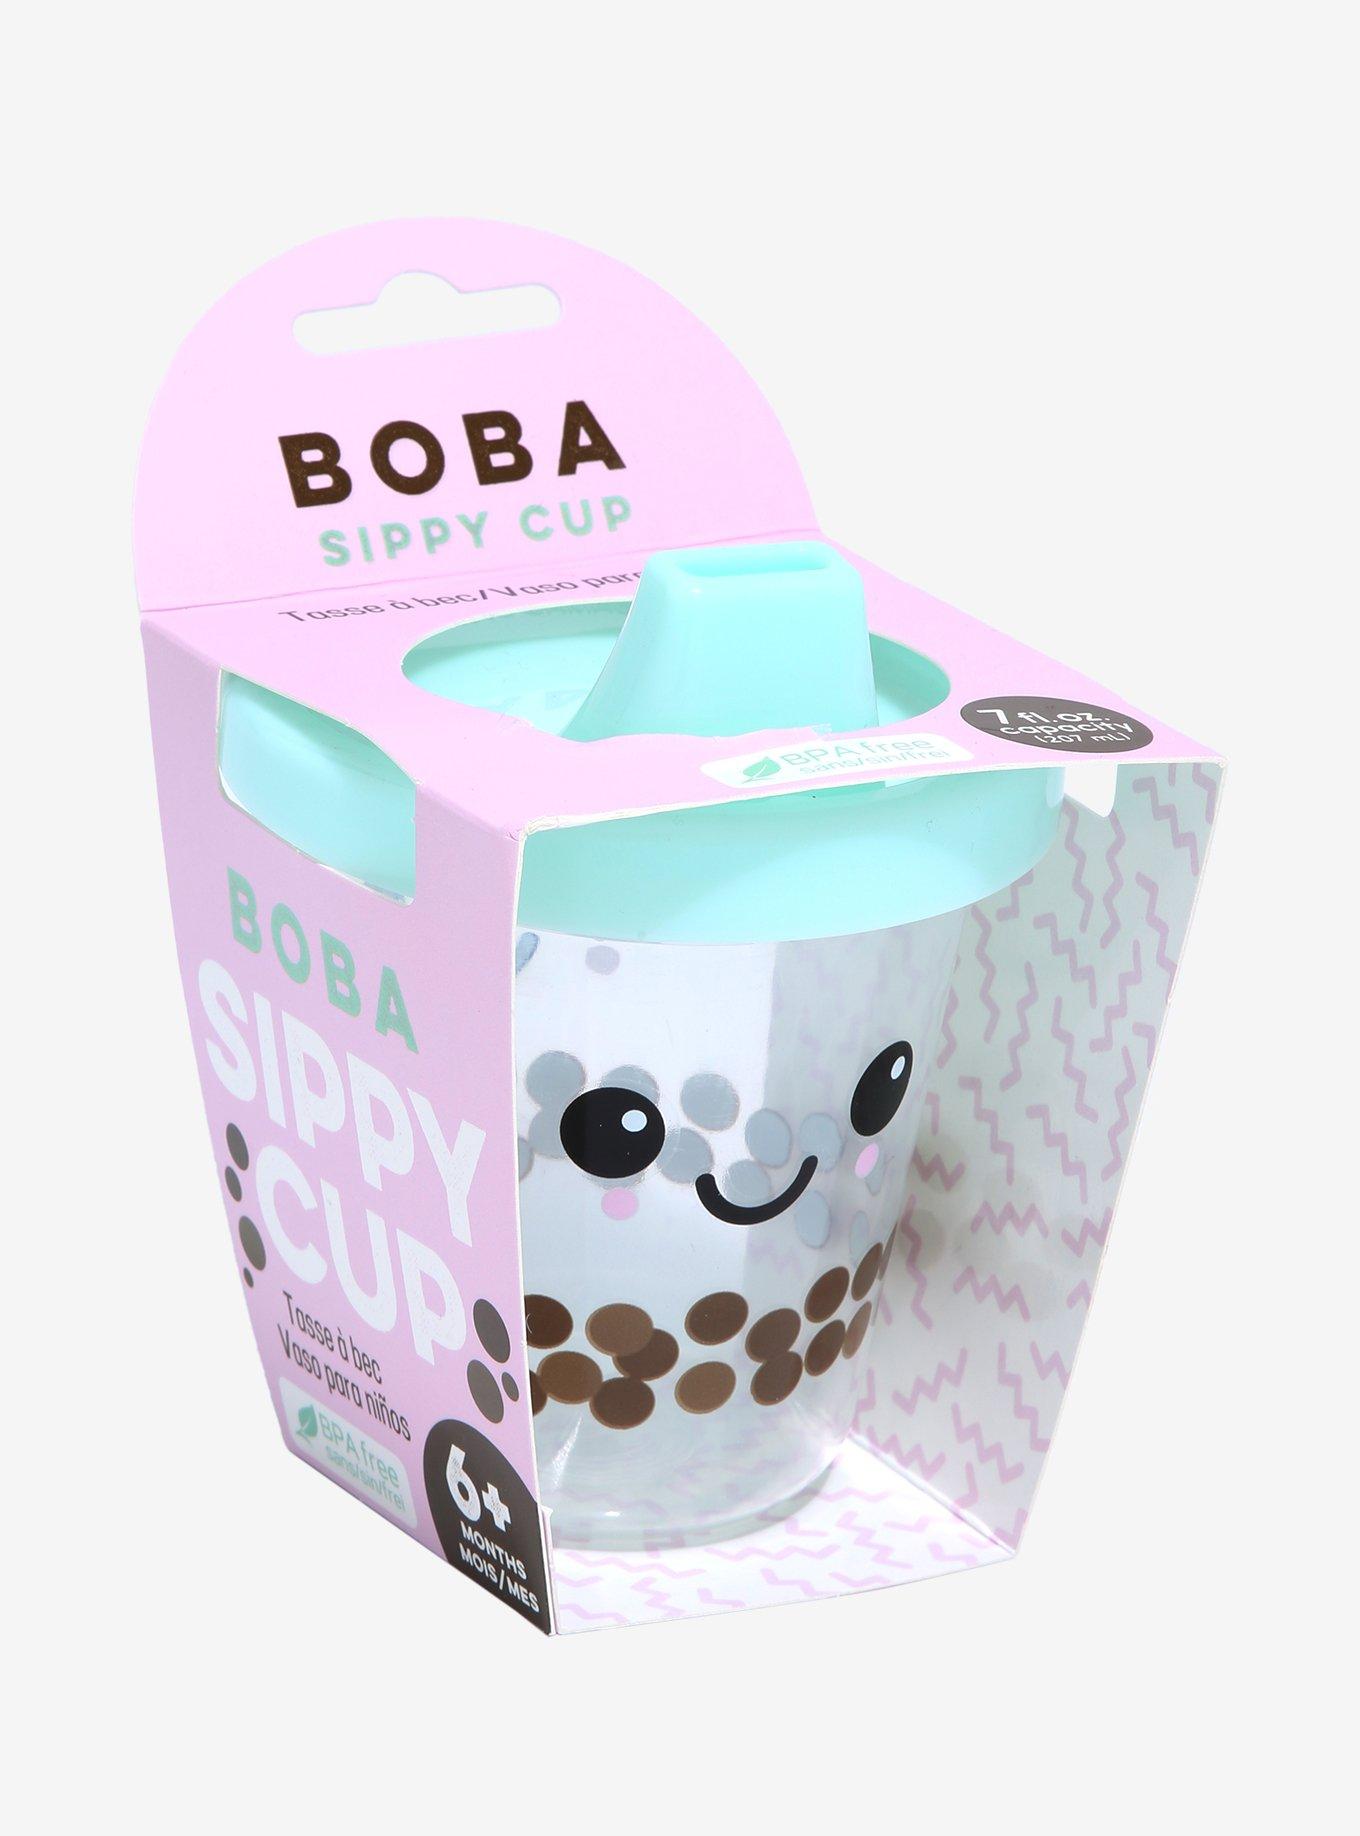 GAMAGO Boba Baby Sippy Cup - Adorably Cute Learner Sippy Cup For Babies,  Toddlers & Kids - 6+ Months…See more GAMAGO Boba Baby Sippy Cup - Adorably